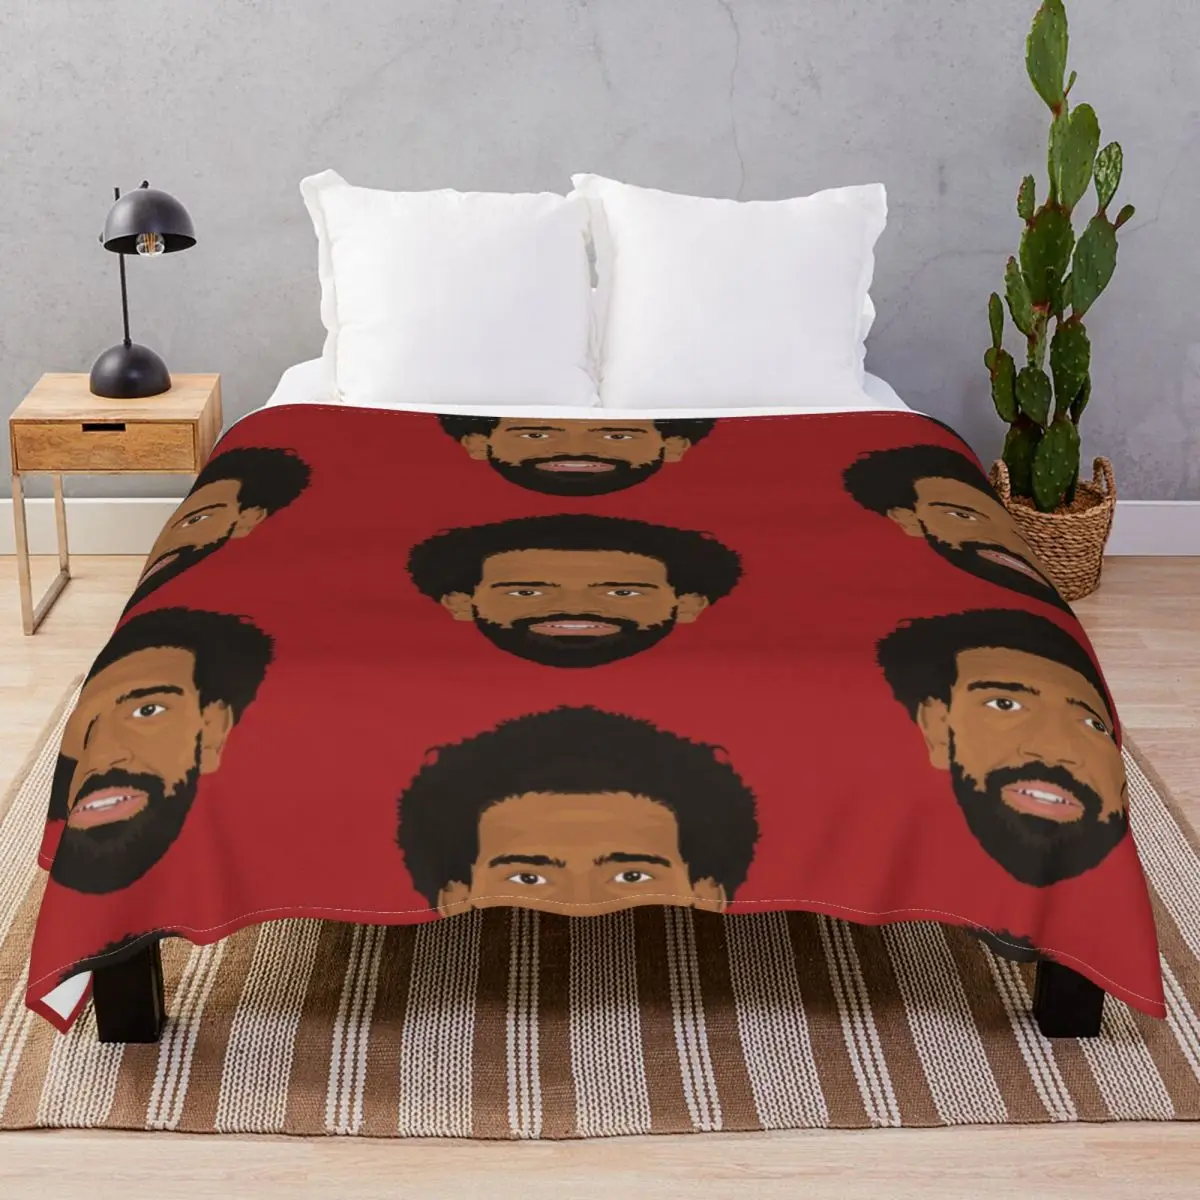 Mo Salah Blankets Coral Fleece Plush Decoration Fluffy Throw Blanket for Bed Home Couch Travel Office